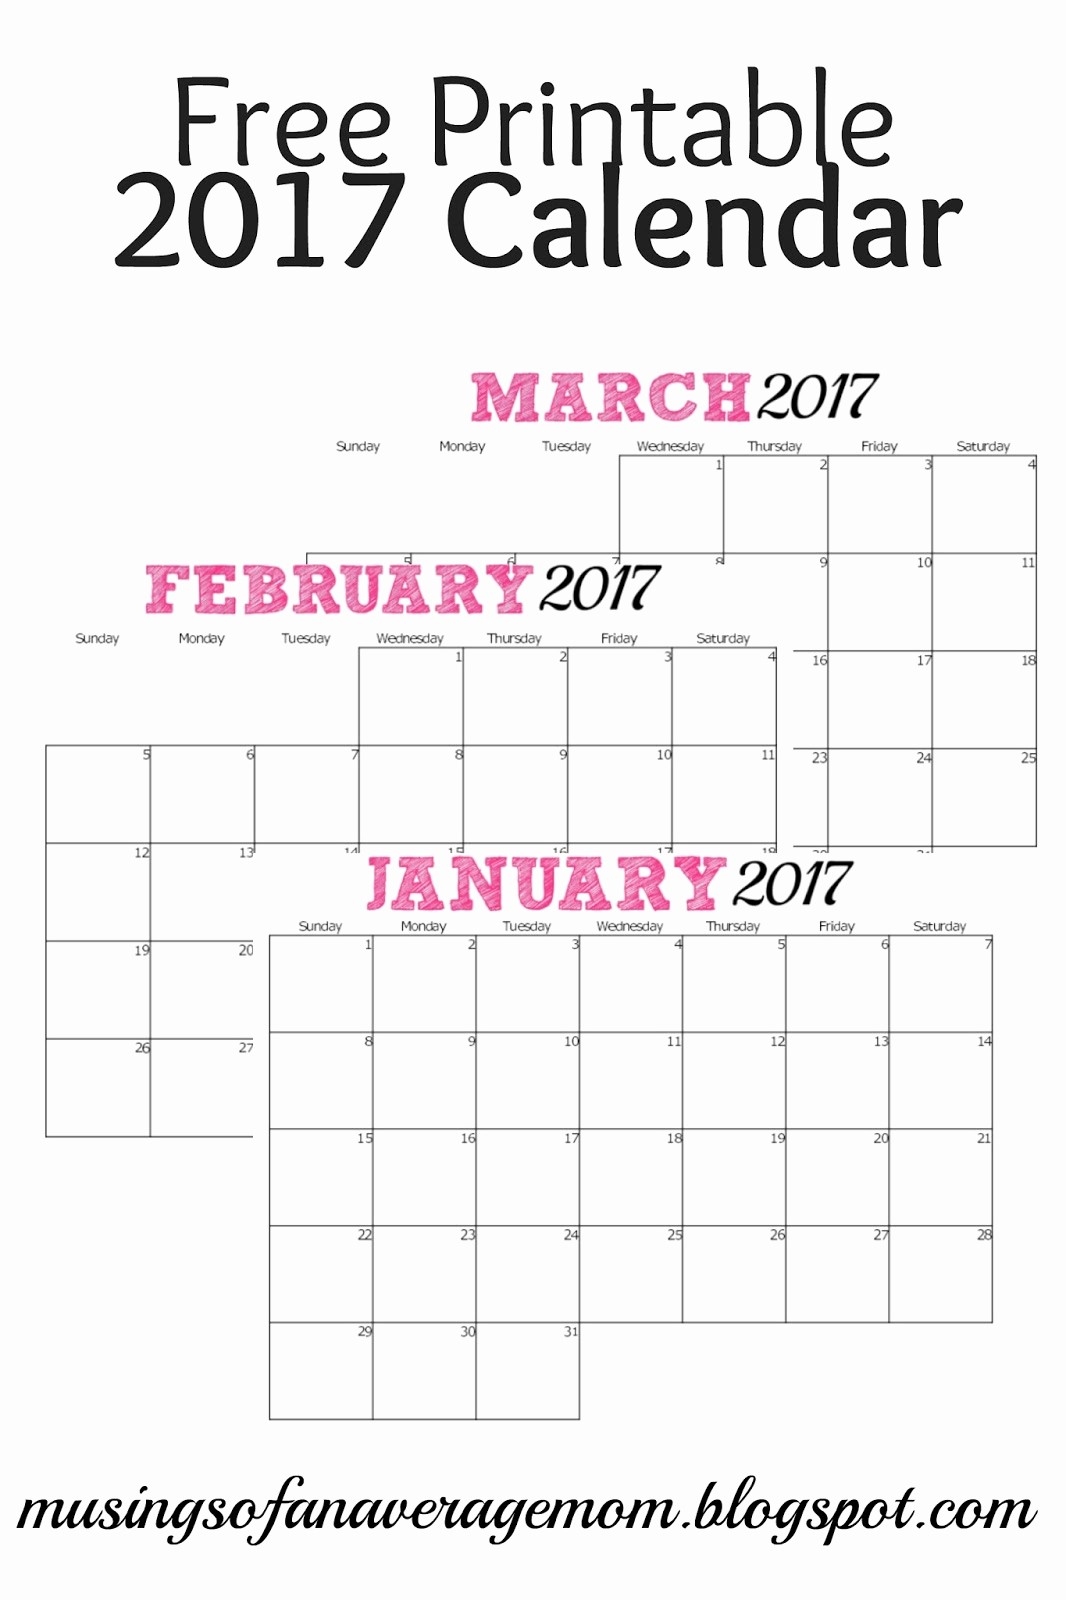 2017 Calendar Month by Month Best Of Musings Of An Average Mom 2017 Monthly Calendars